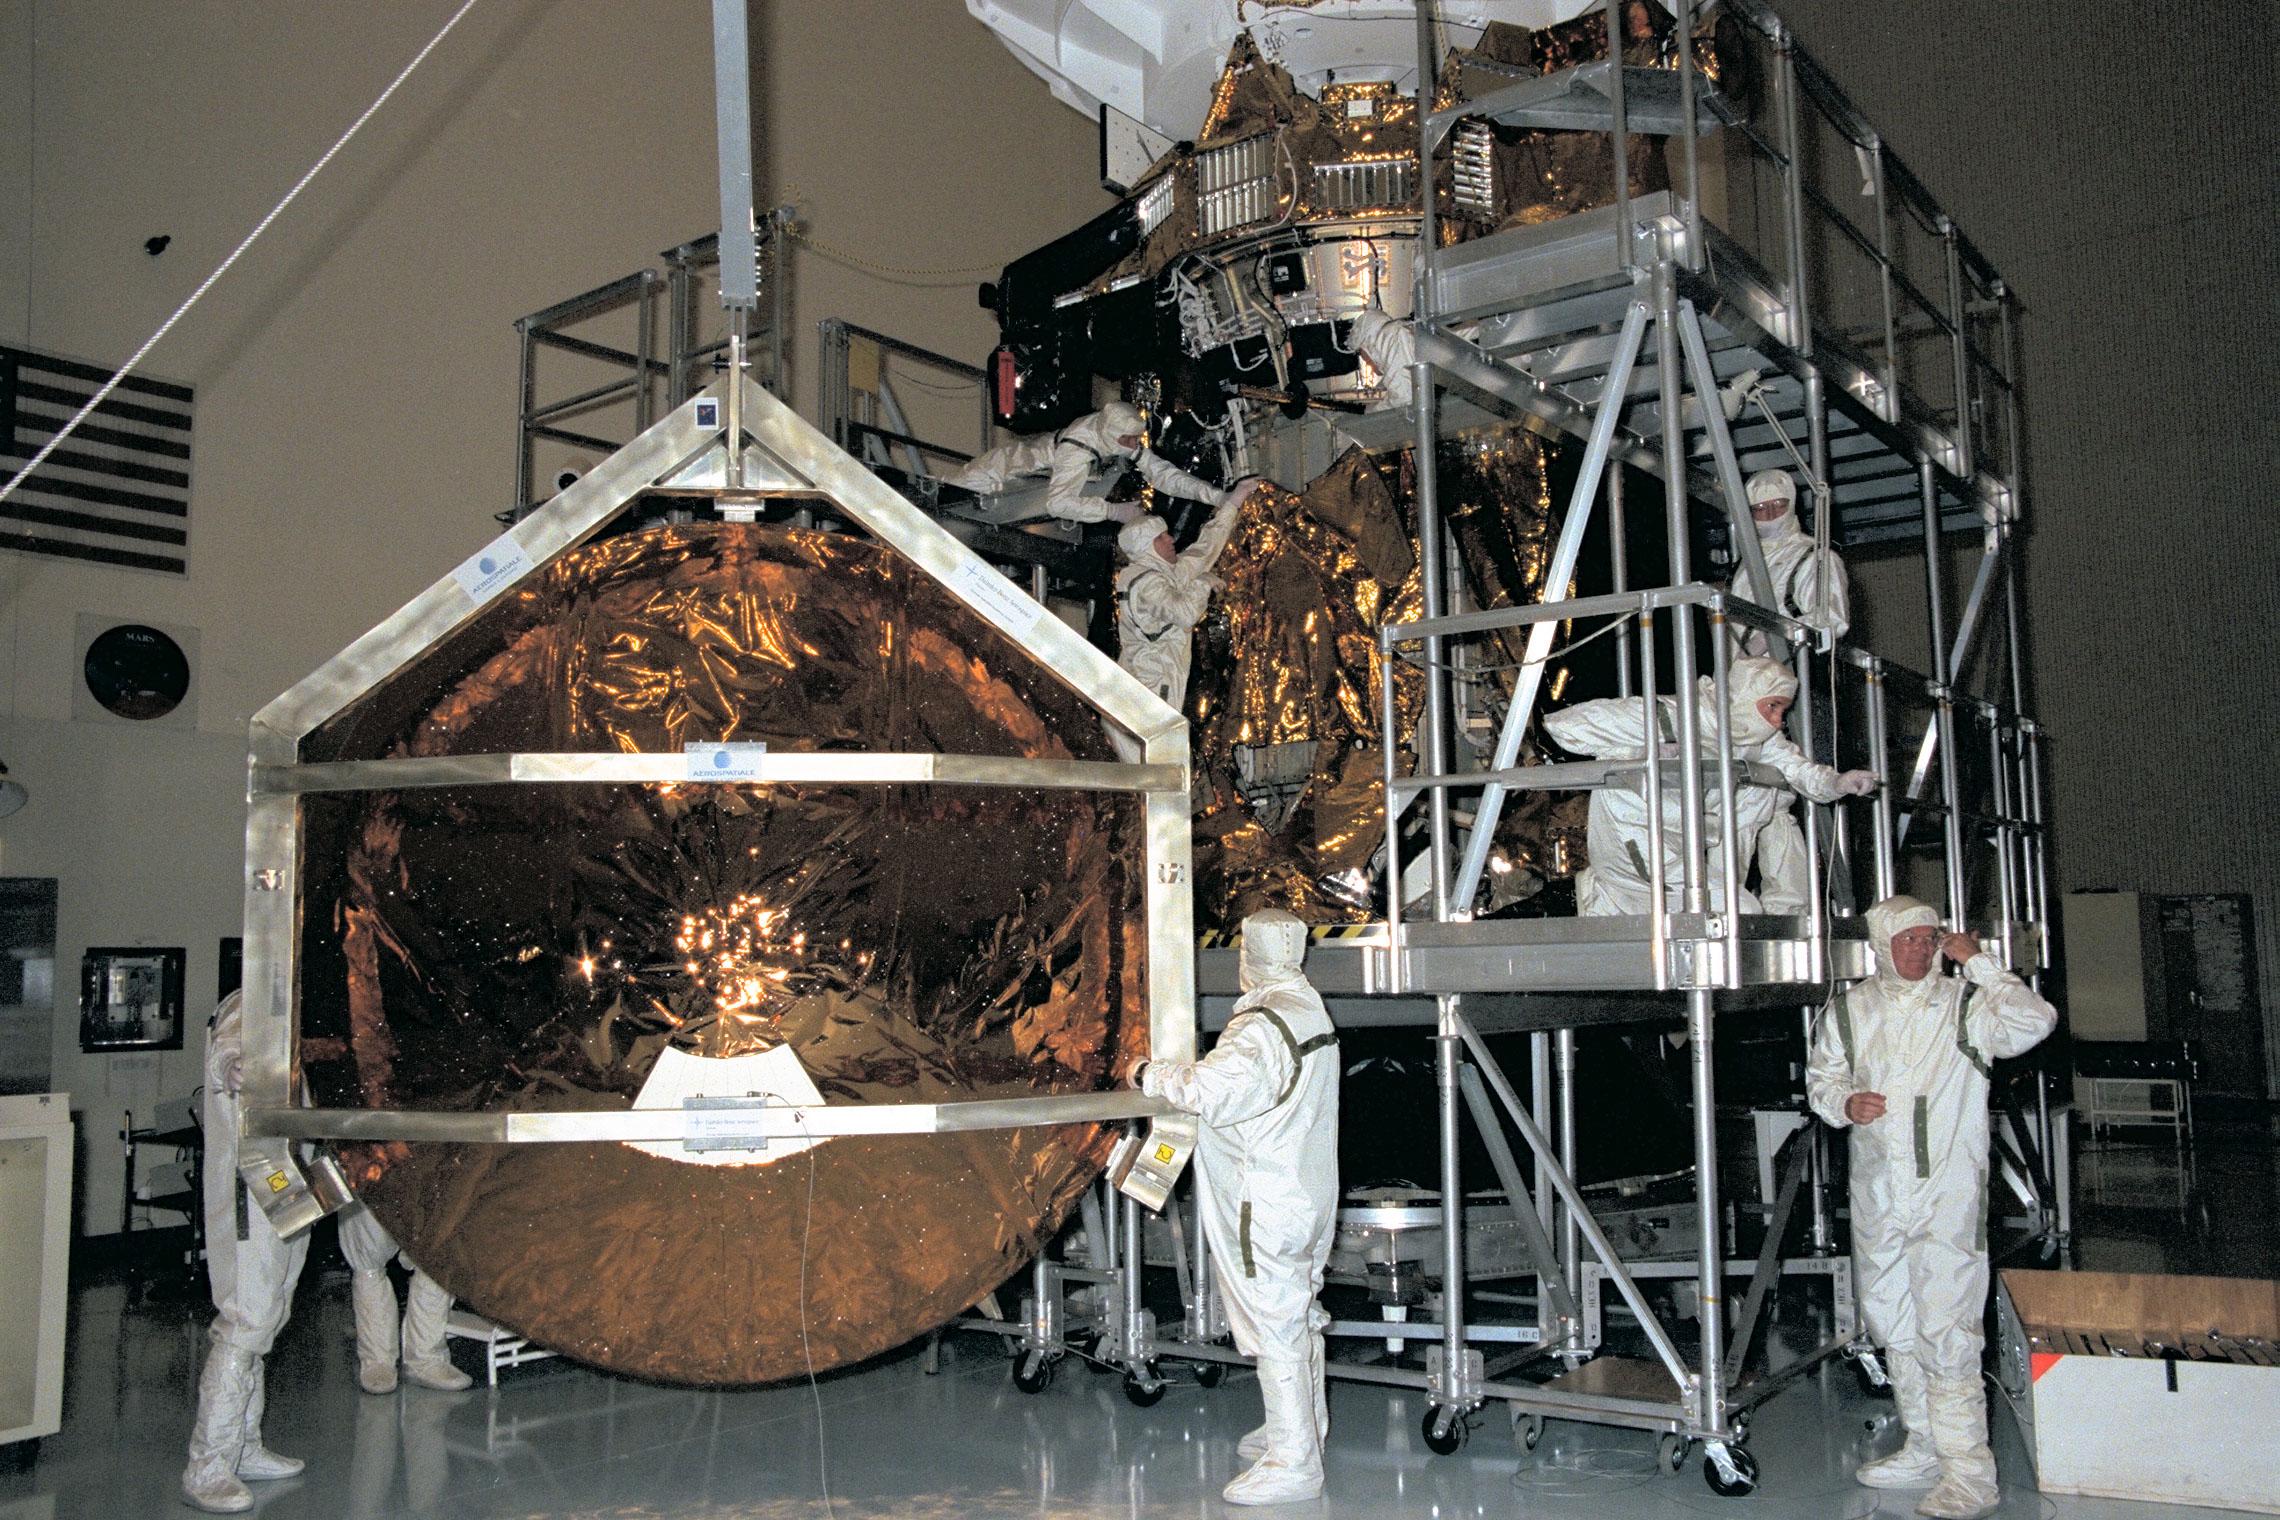 Engineers working on two spacecraft